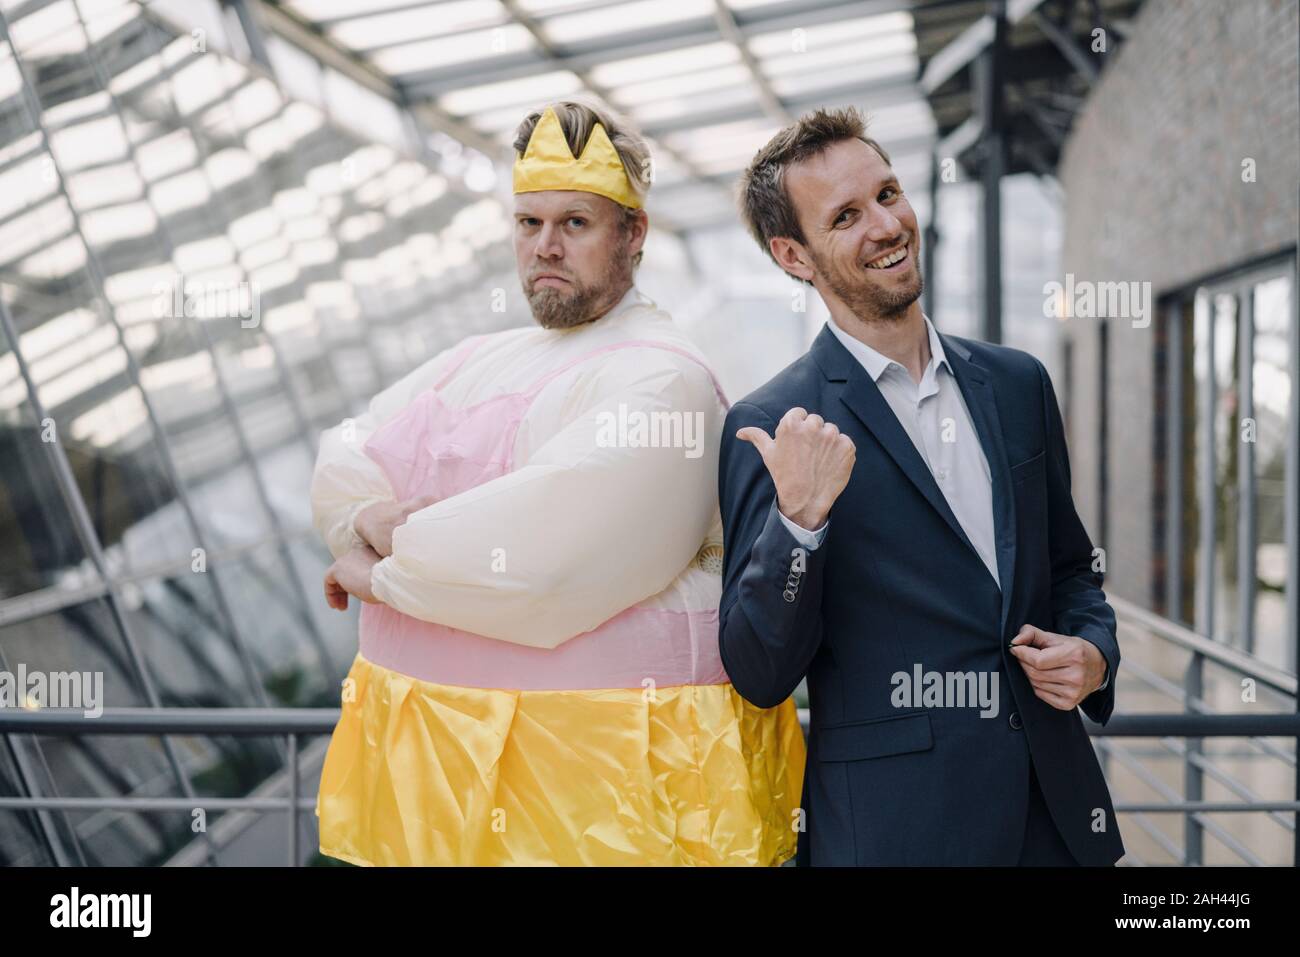 Laughing businessman pointing at man dressed up as a ballerina in office Stock Photo